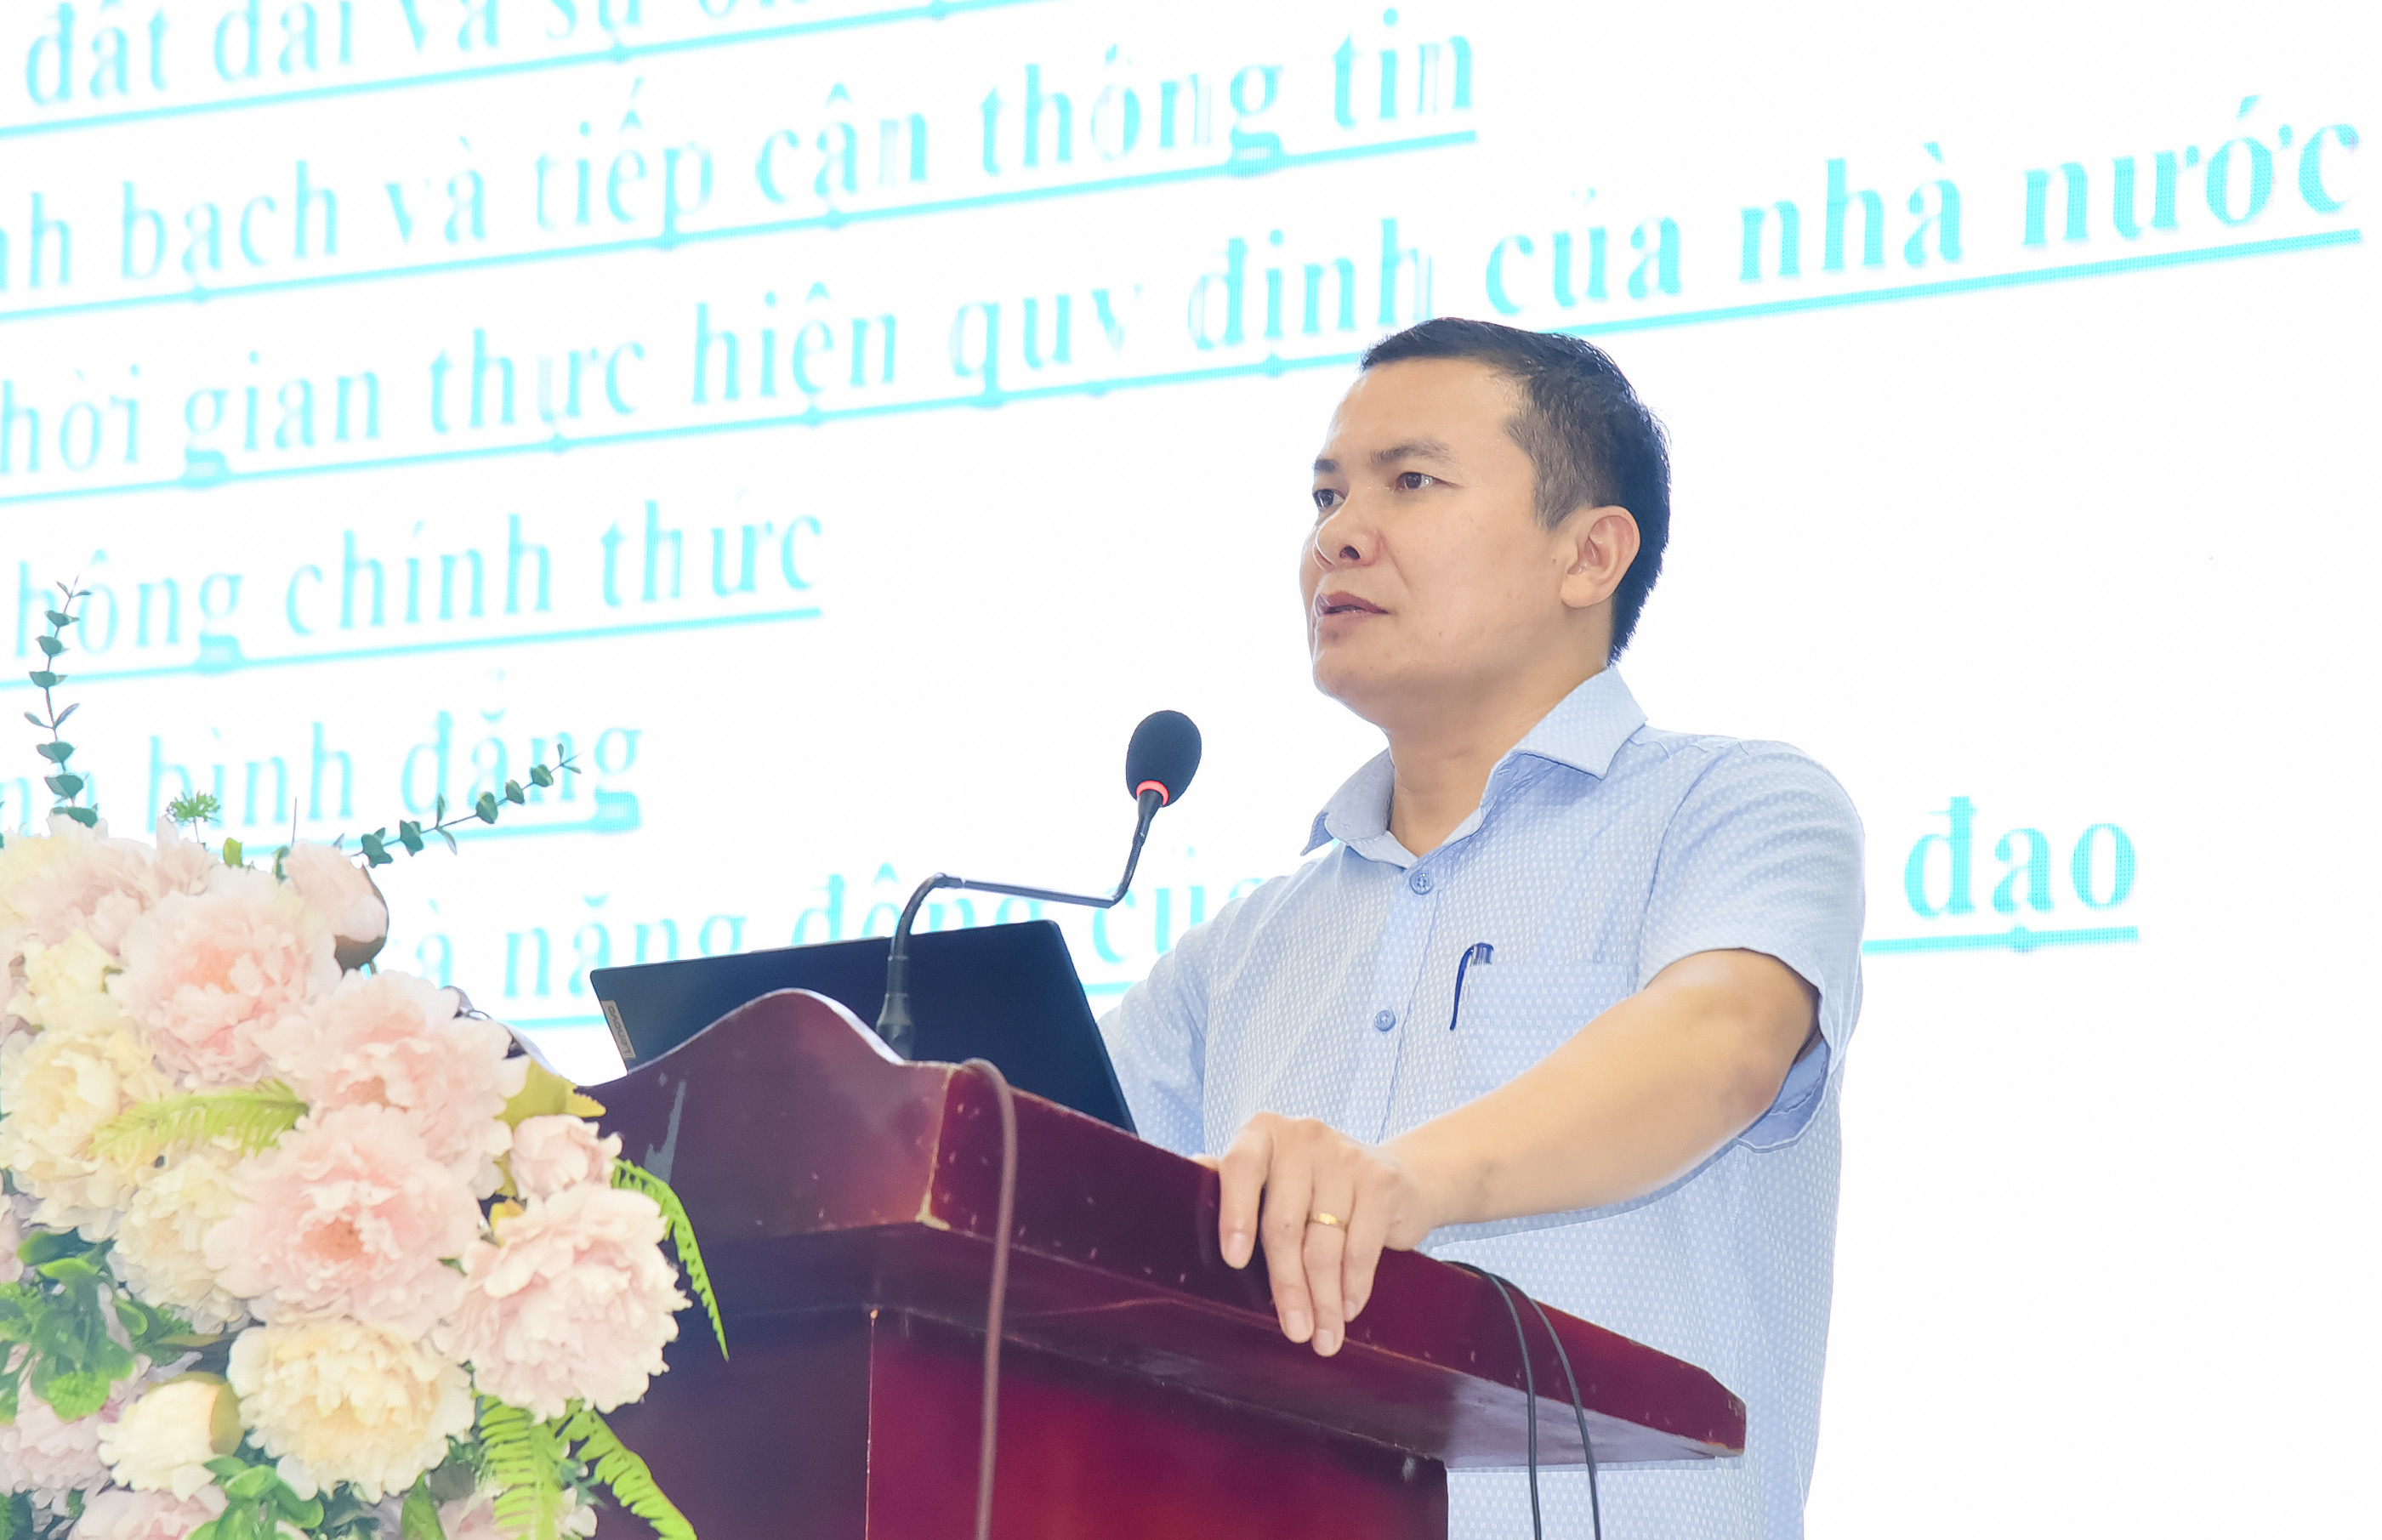 bna_a vy. anh thanh le.jpg